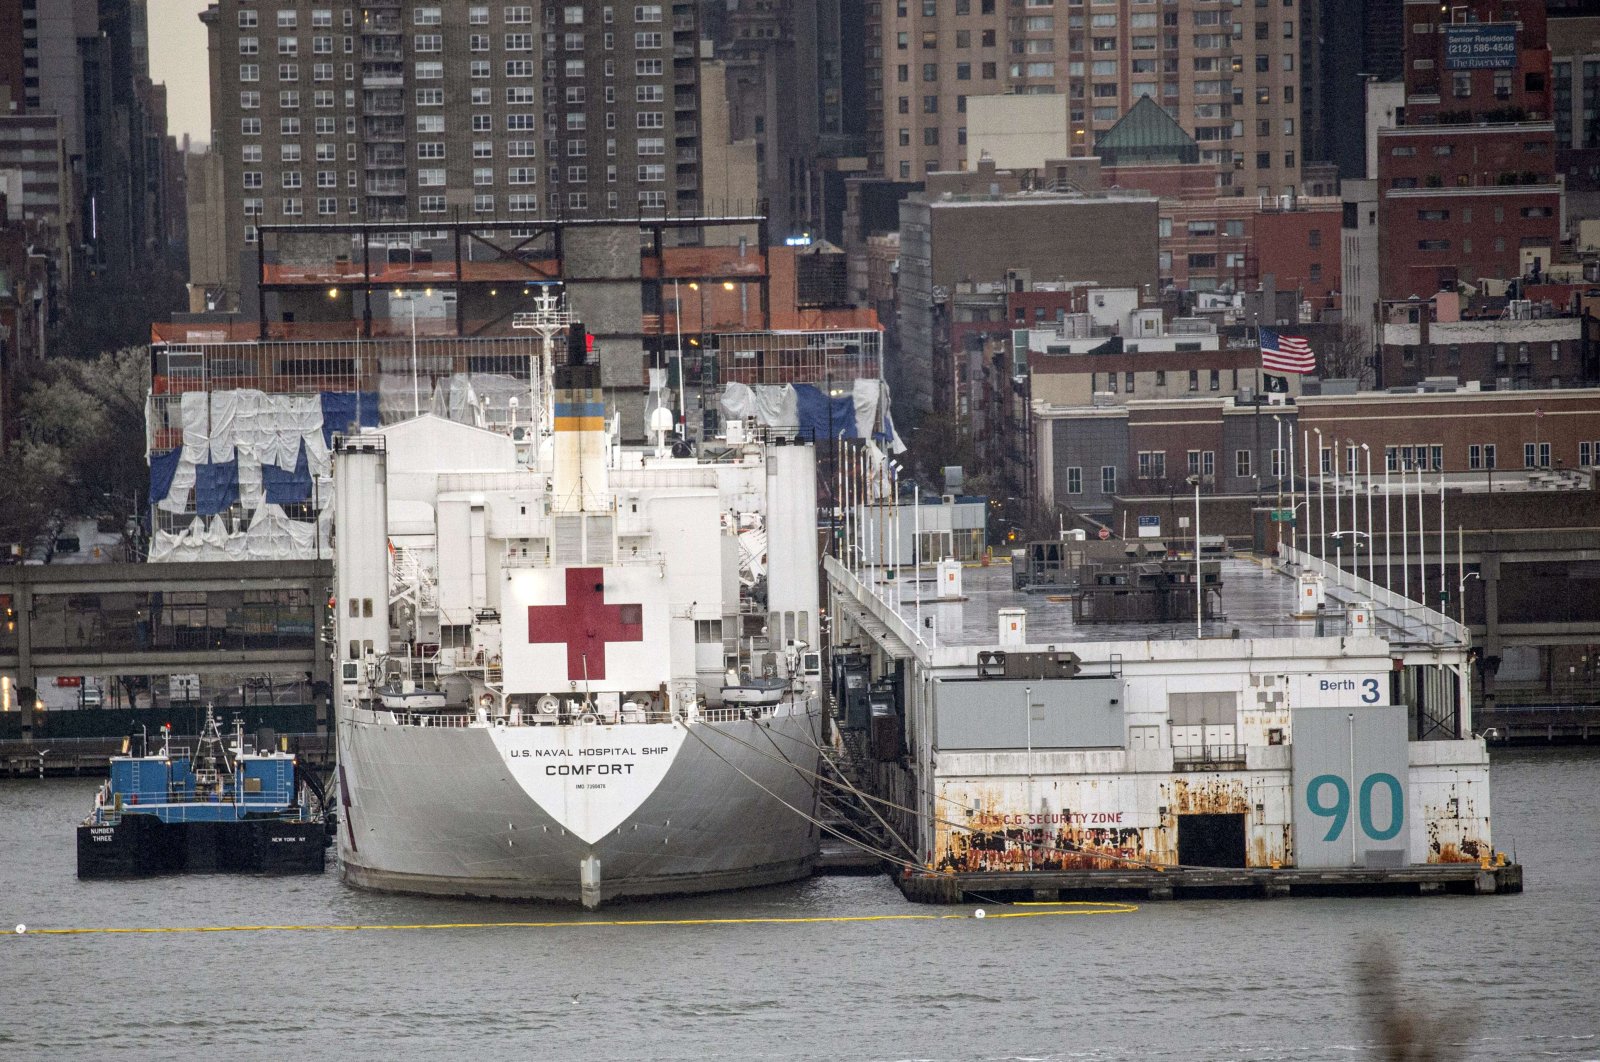 The USNS Comfort navy hospital ship is docked at Pier 90 in Manhattan on April 3, 2020 as seen from West New York, New Jersey. (AFP Photo)